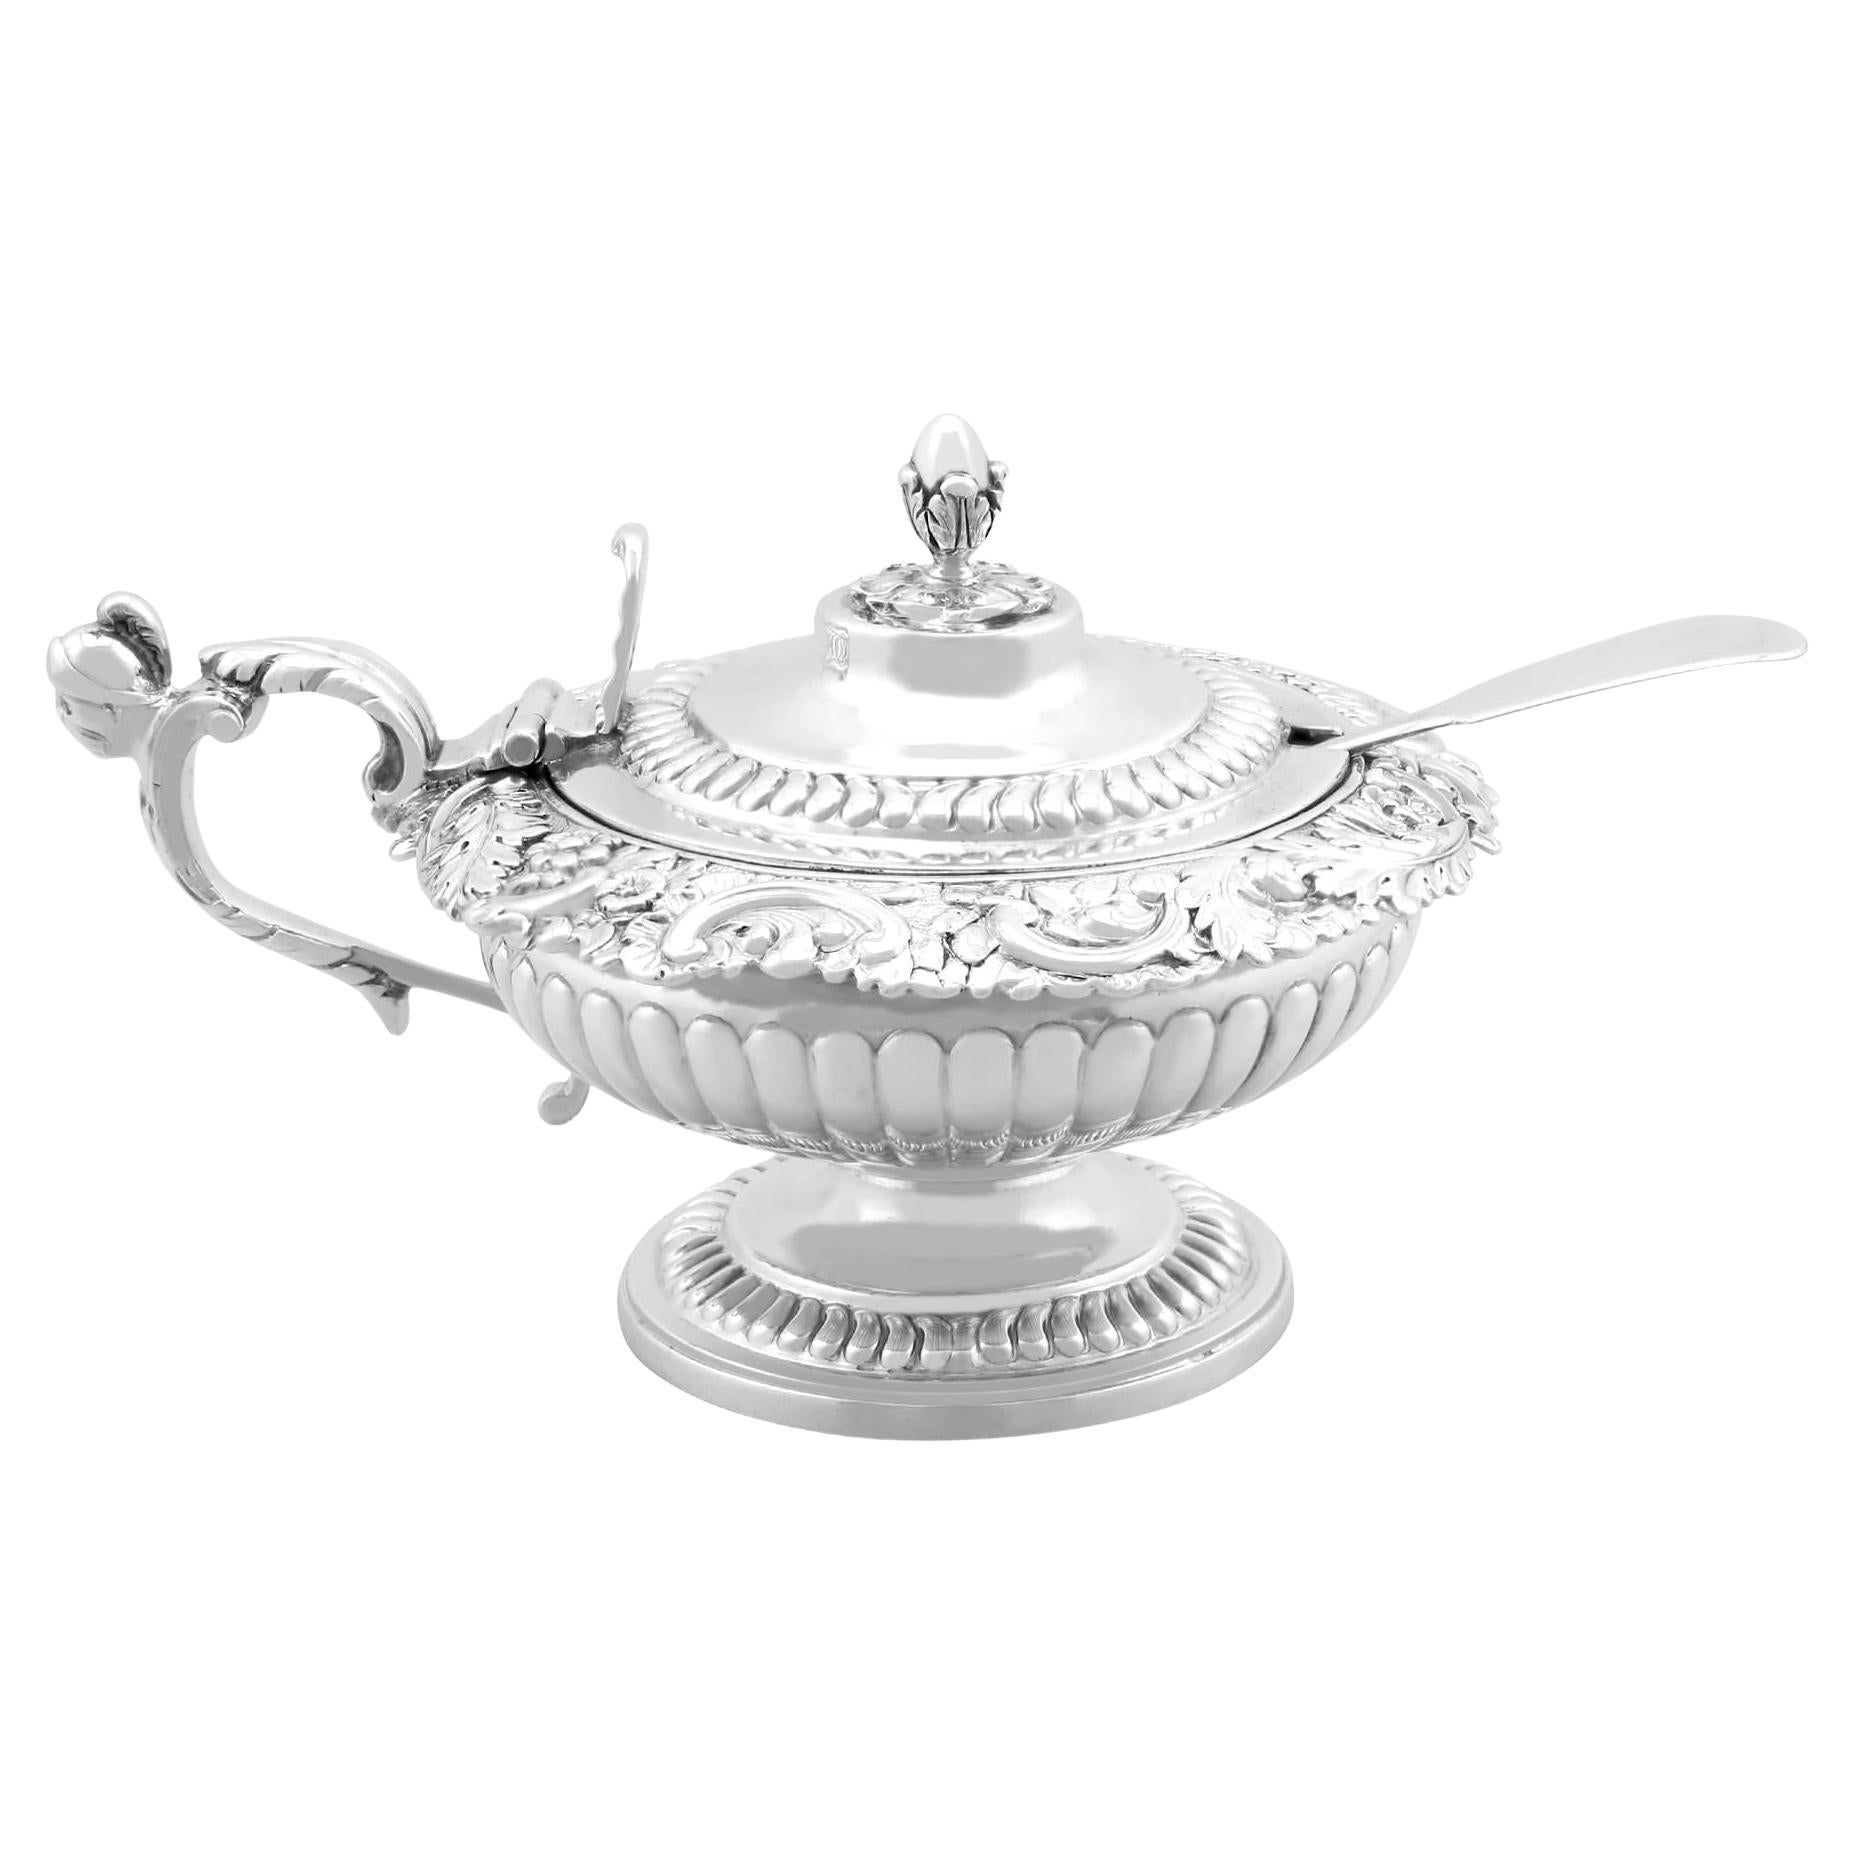 Antique George III Sterling Silver Mustard Pot (1817)